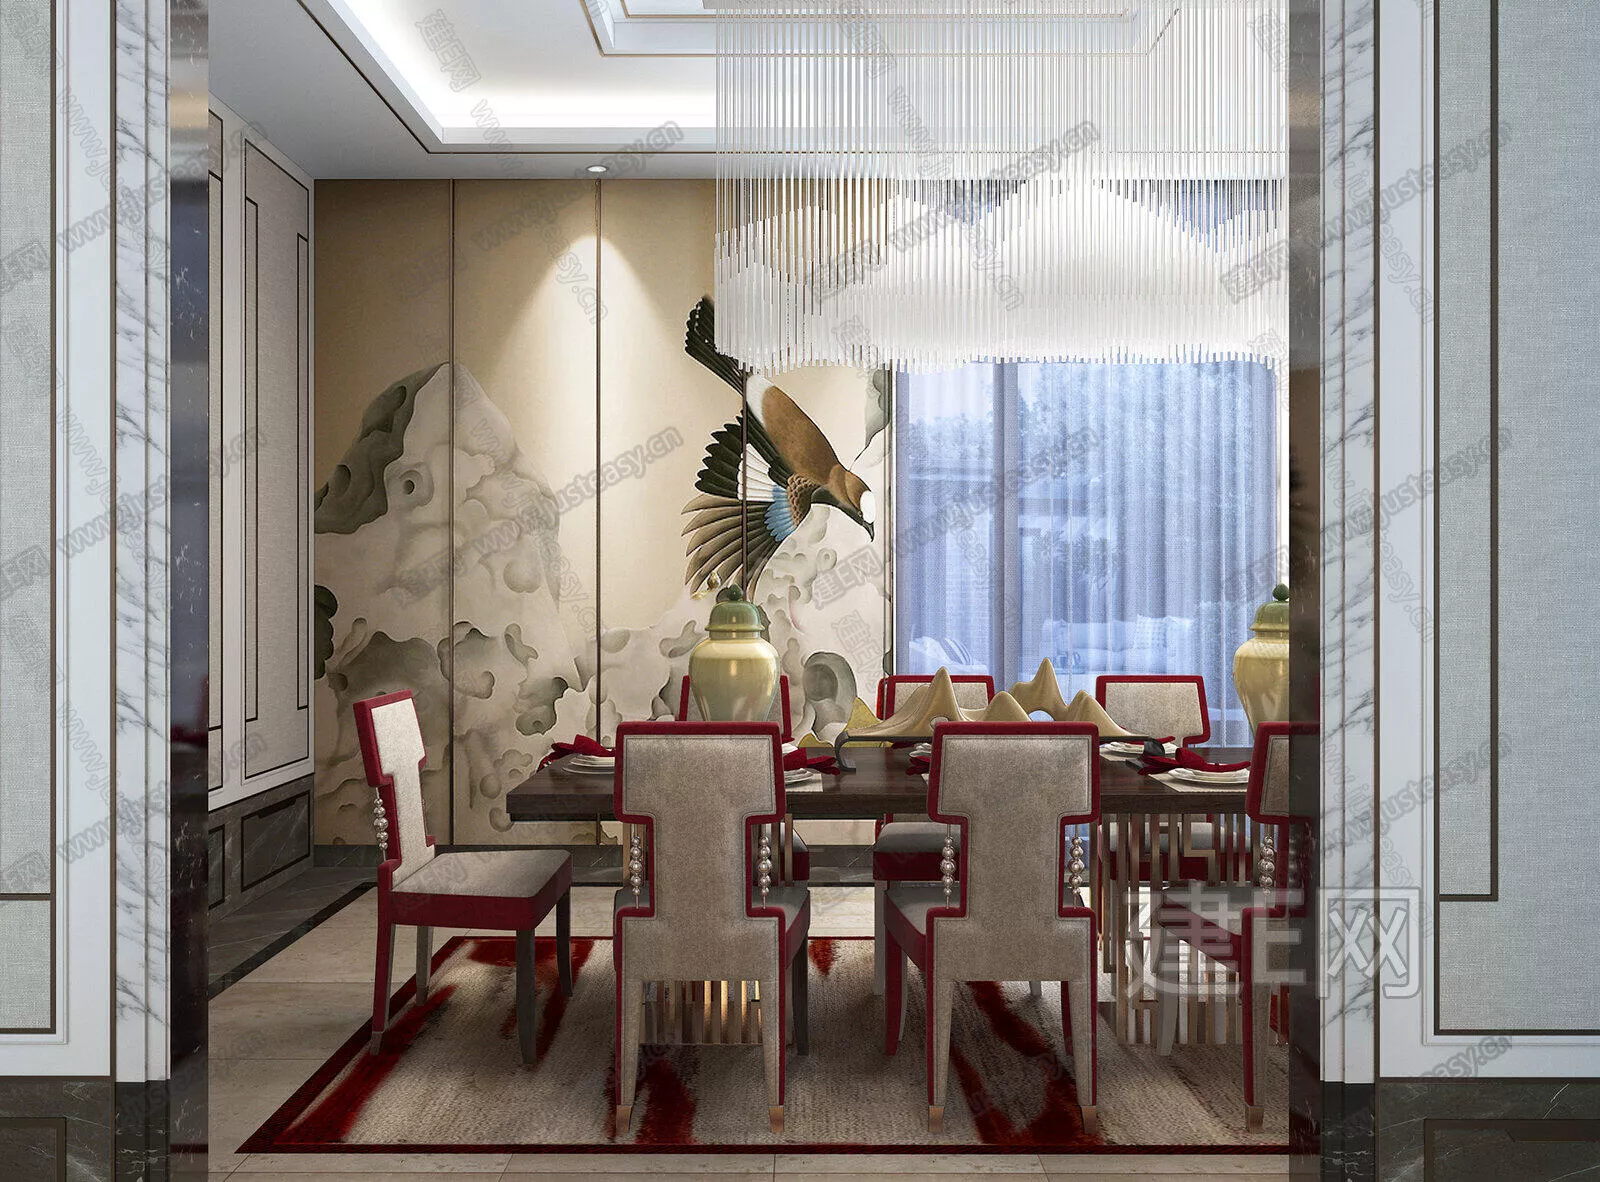 NEO CLASSIC DINING ROOM - SKETCHUP 3D SCENE - ENSCAPE - 112938395